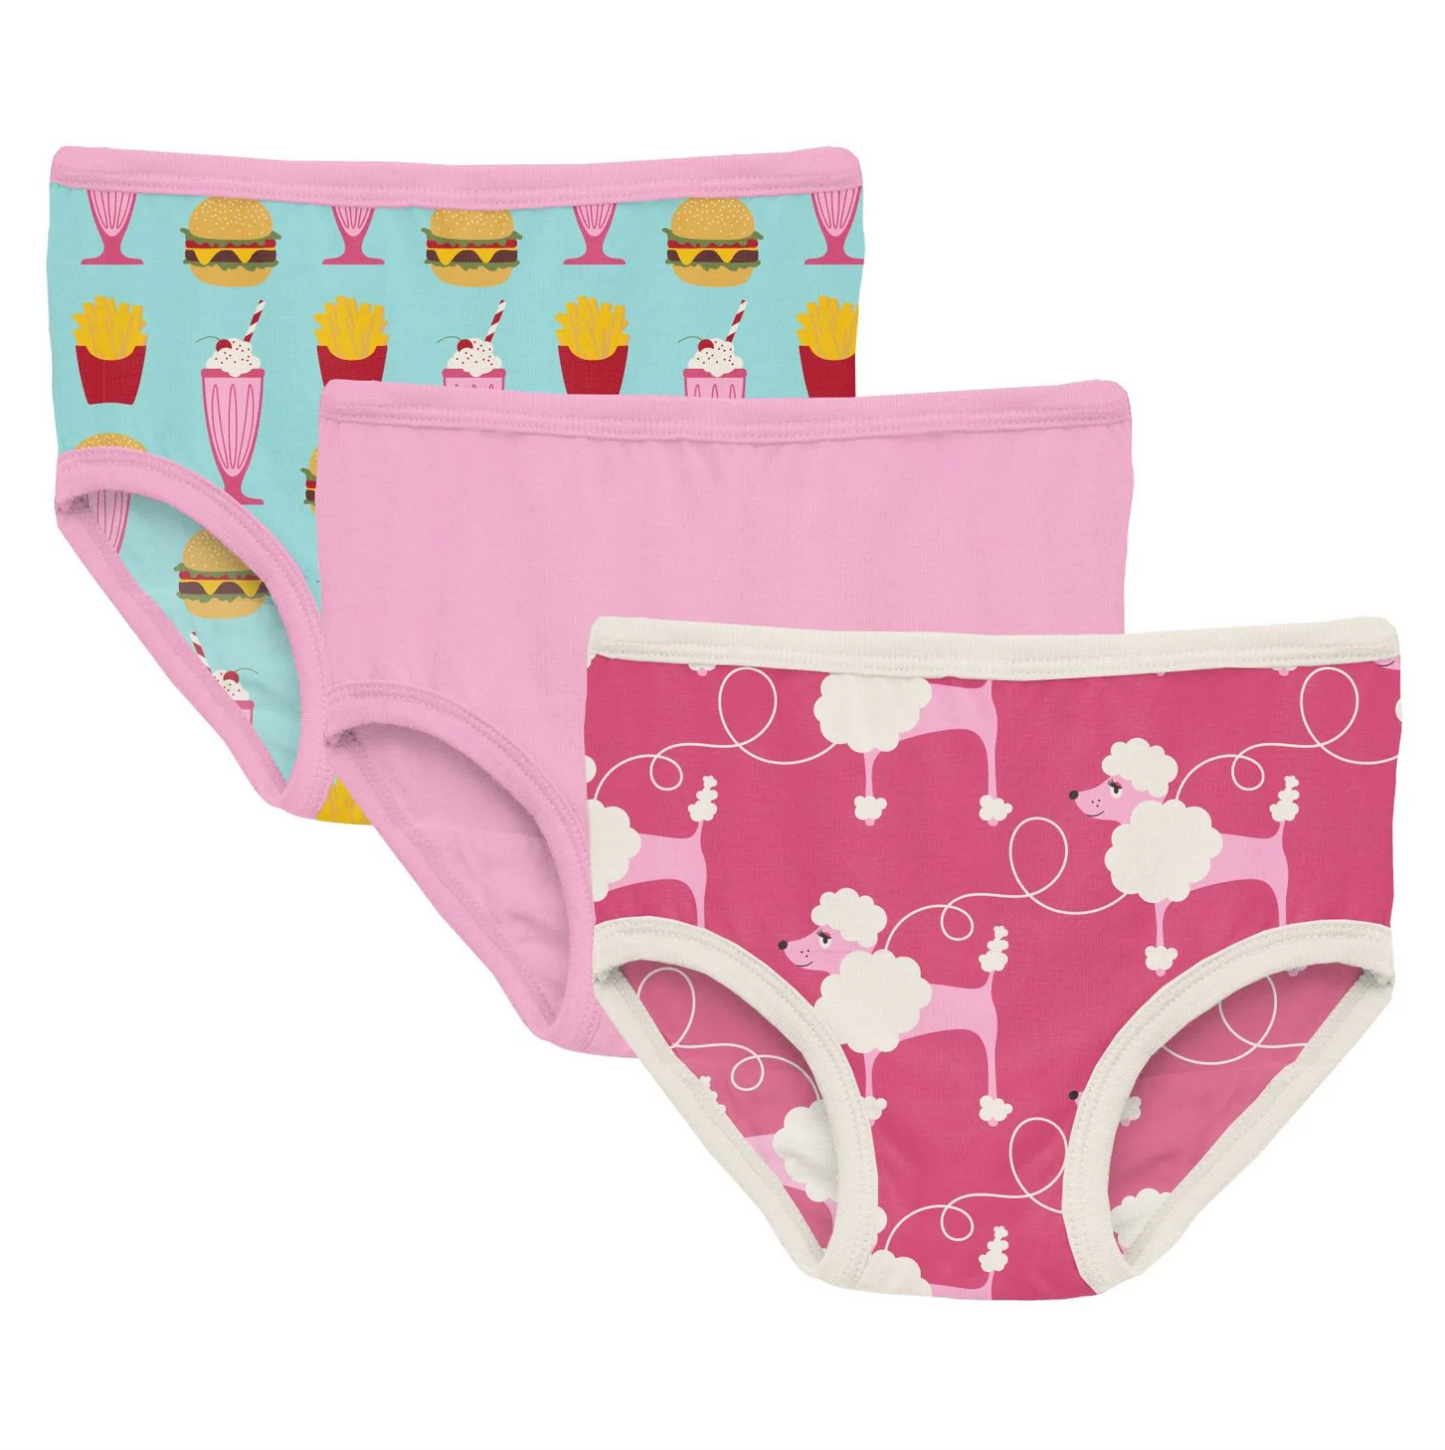 Print Underwear Set of 3 in Sumer Sky Cheeseburger, Flamingo Poodles & Cotton Candy